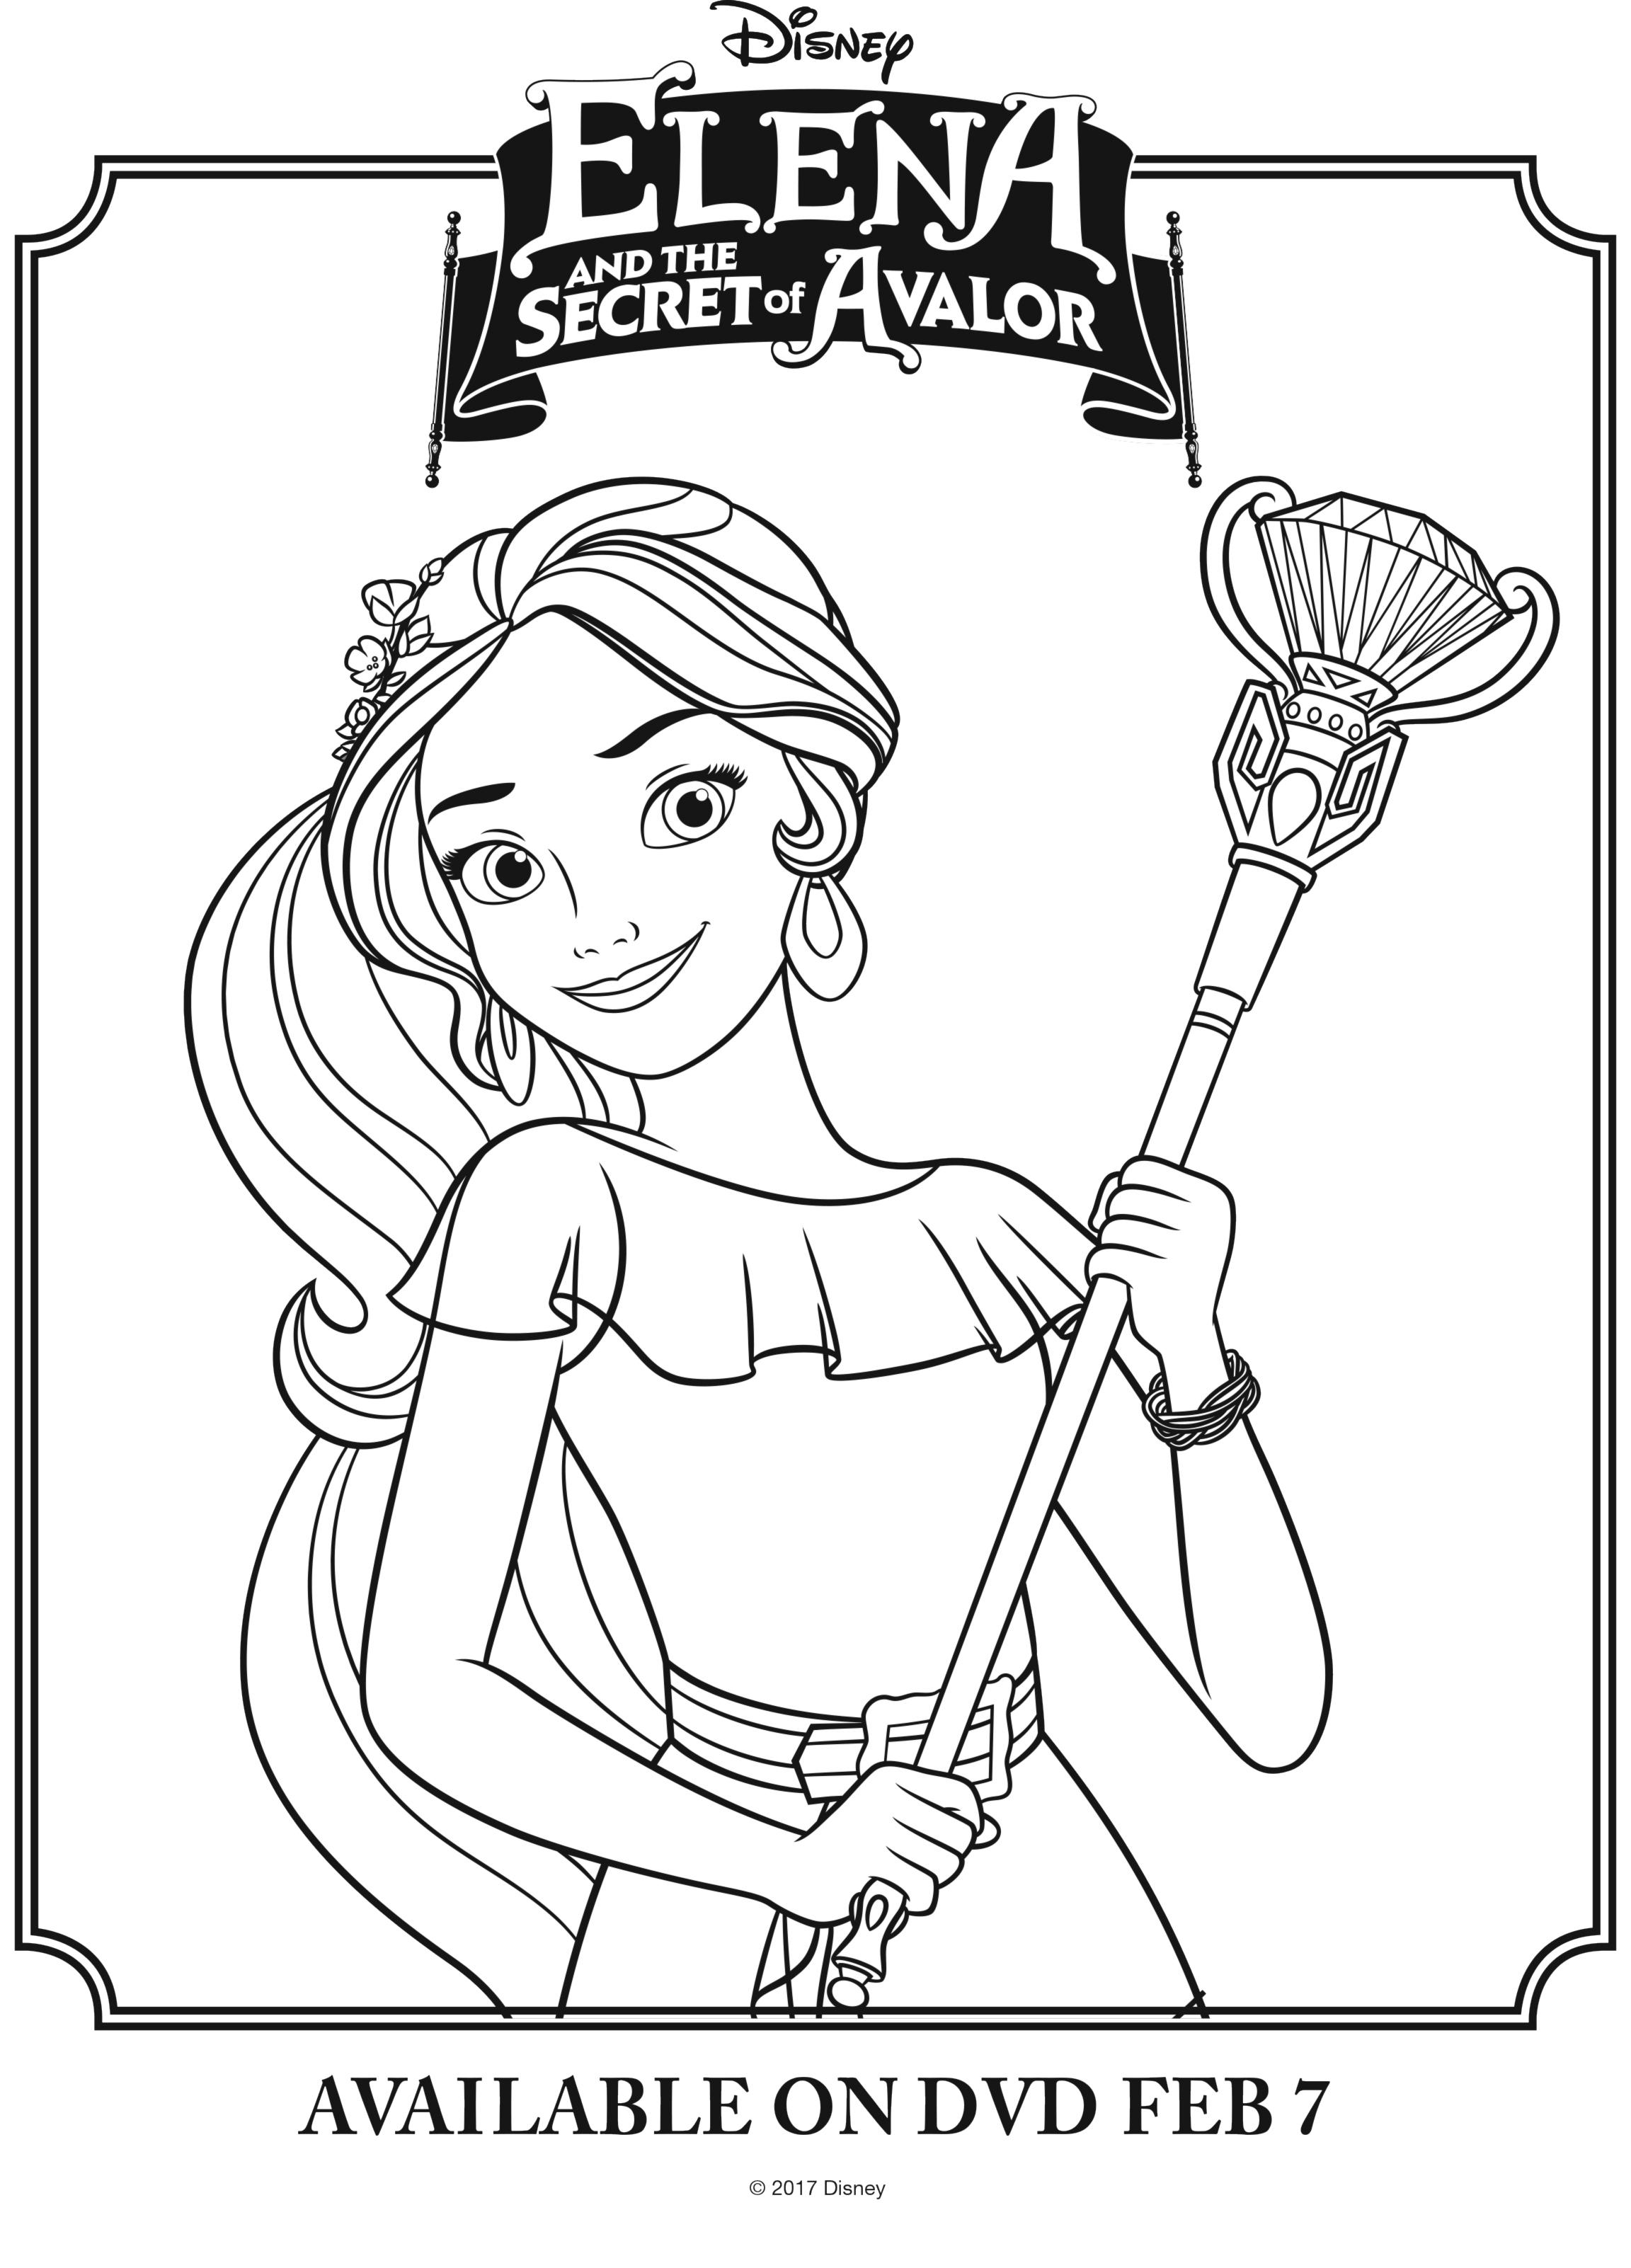 Image of Elena Avalor to color, easy for children